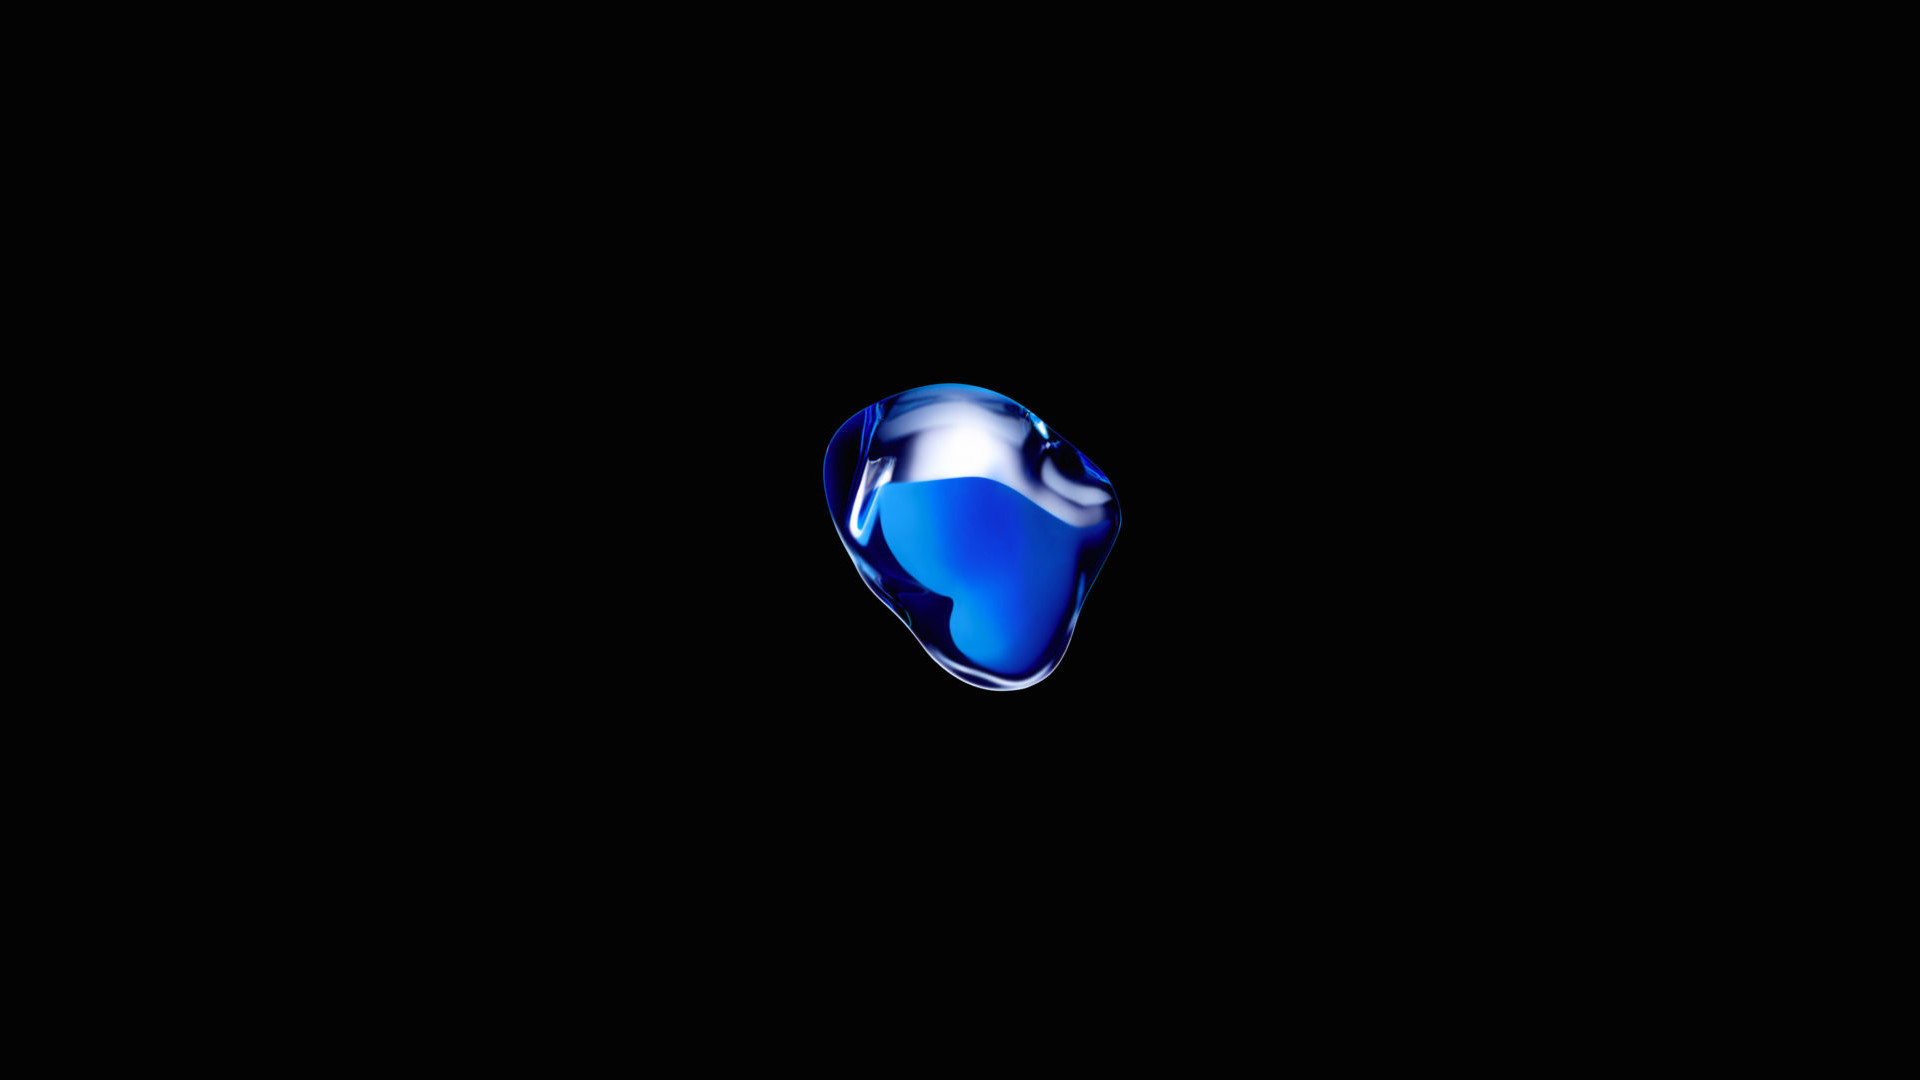 1920x1080 iPhone 7 Blue water droplet wallpaper for MacOS  ...